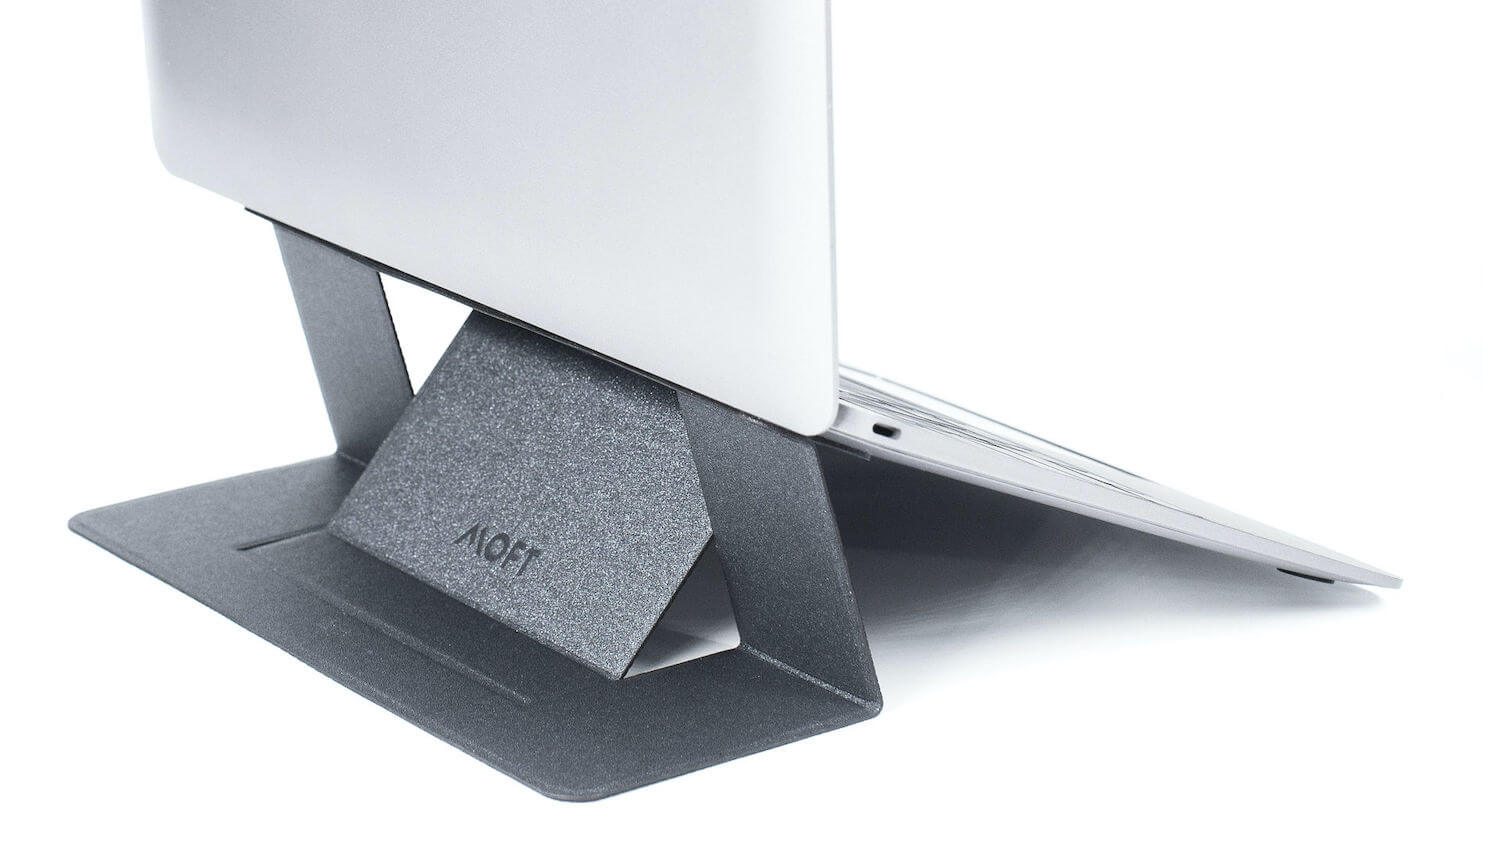 Moft invisible laptop stand